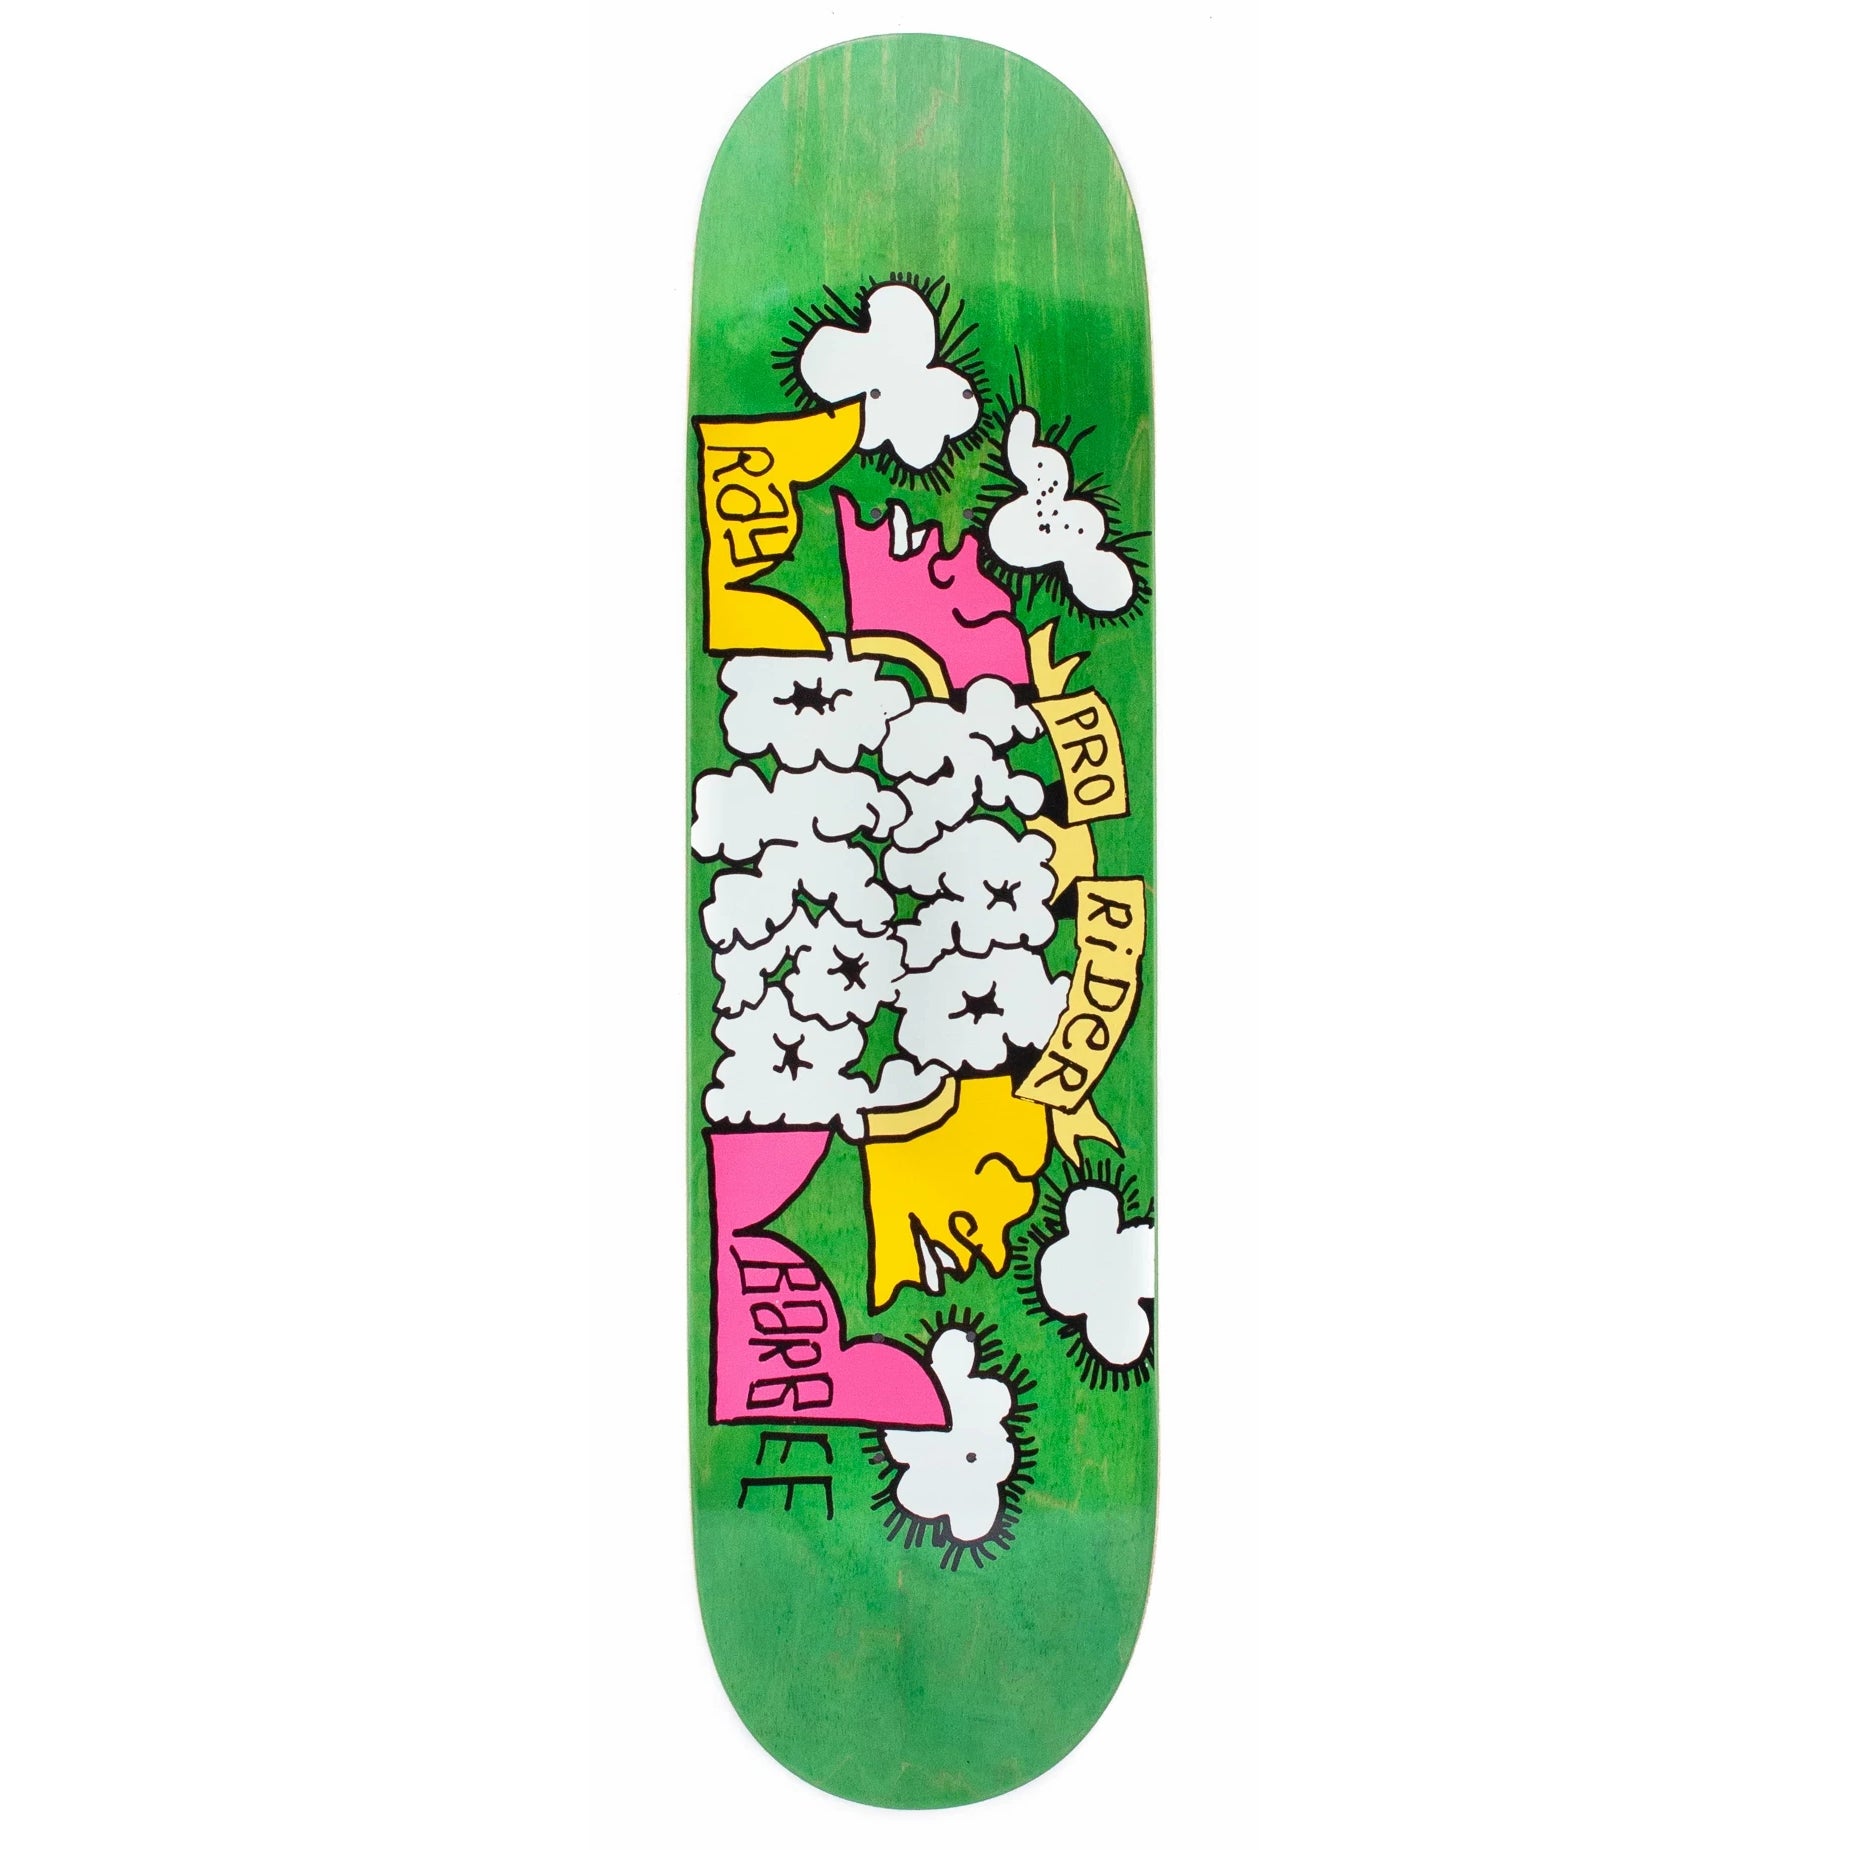 Ray Barbee Clouds Pro Krooked Skateboard Deck